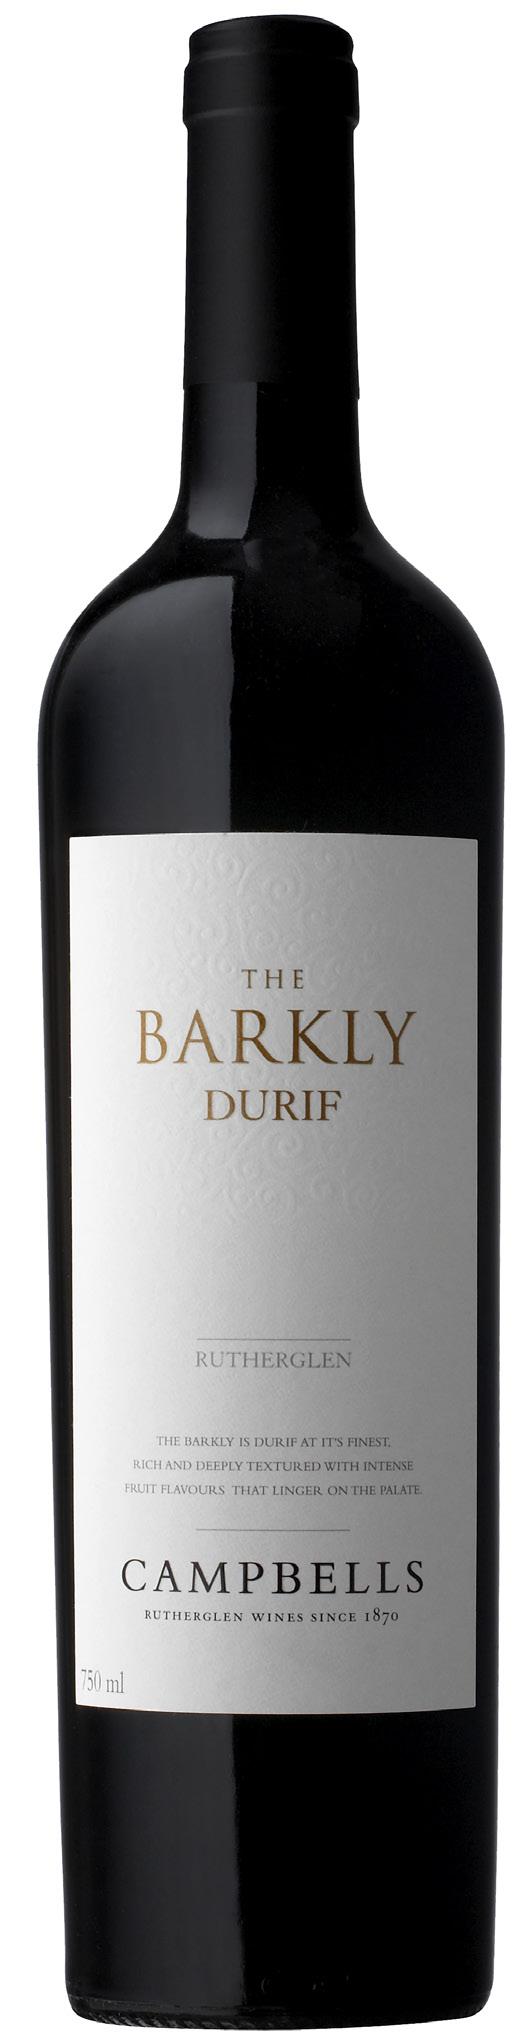 THE BARKLY DURIF 2007 The Barkly is what we believe durif from the Rutherglen Wine Region should be. Unquestionably, it is durif at its finest.